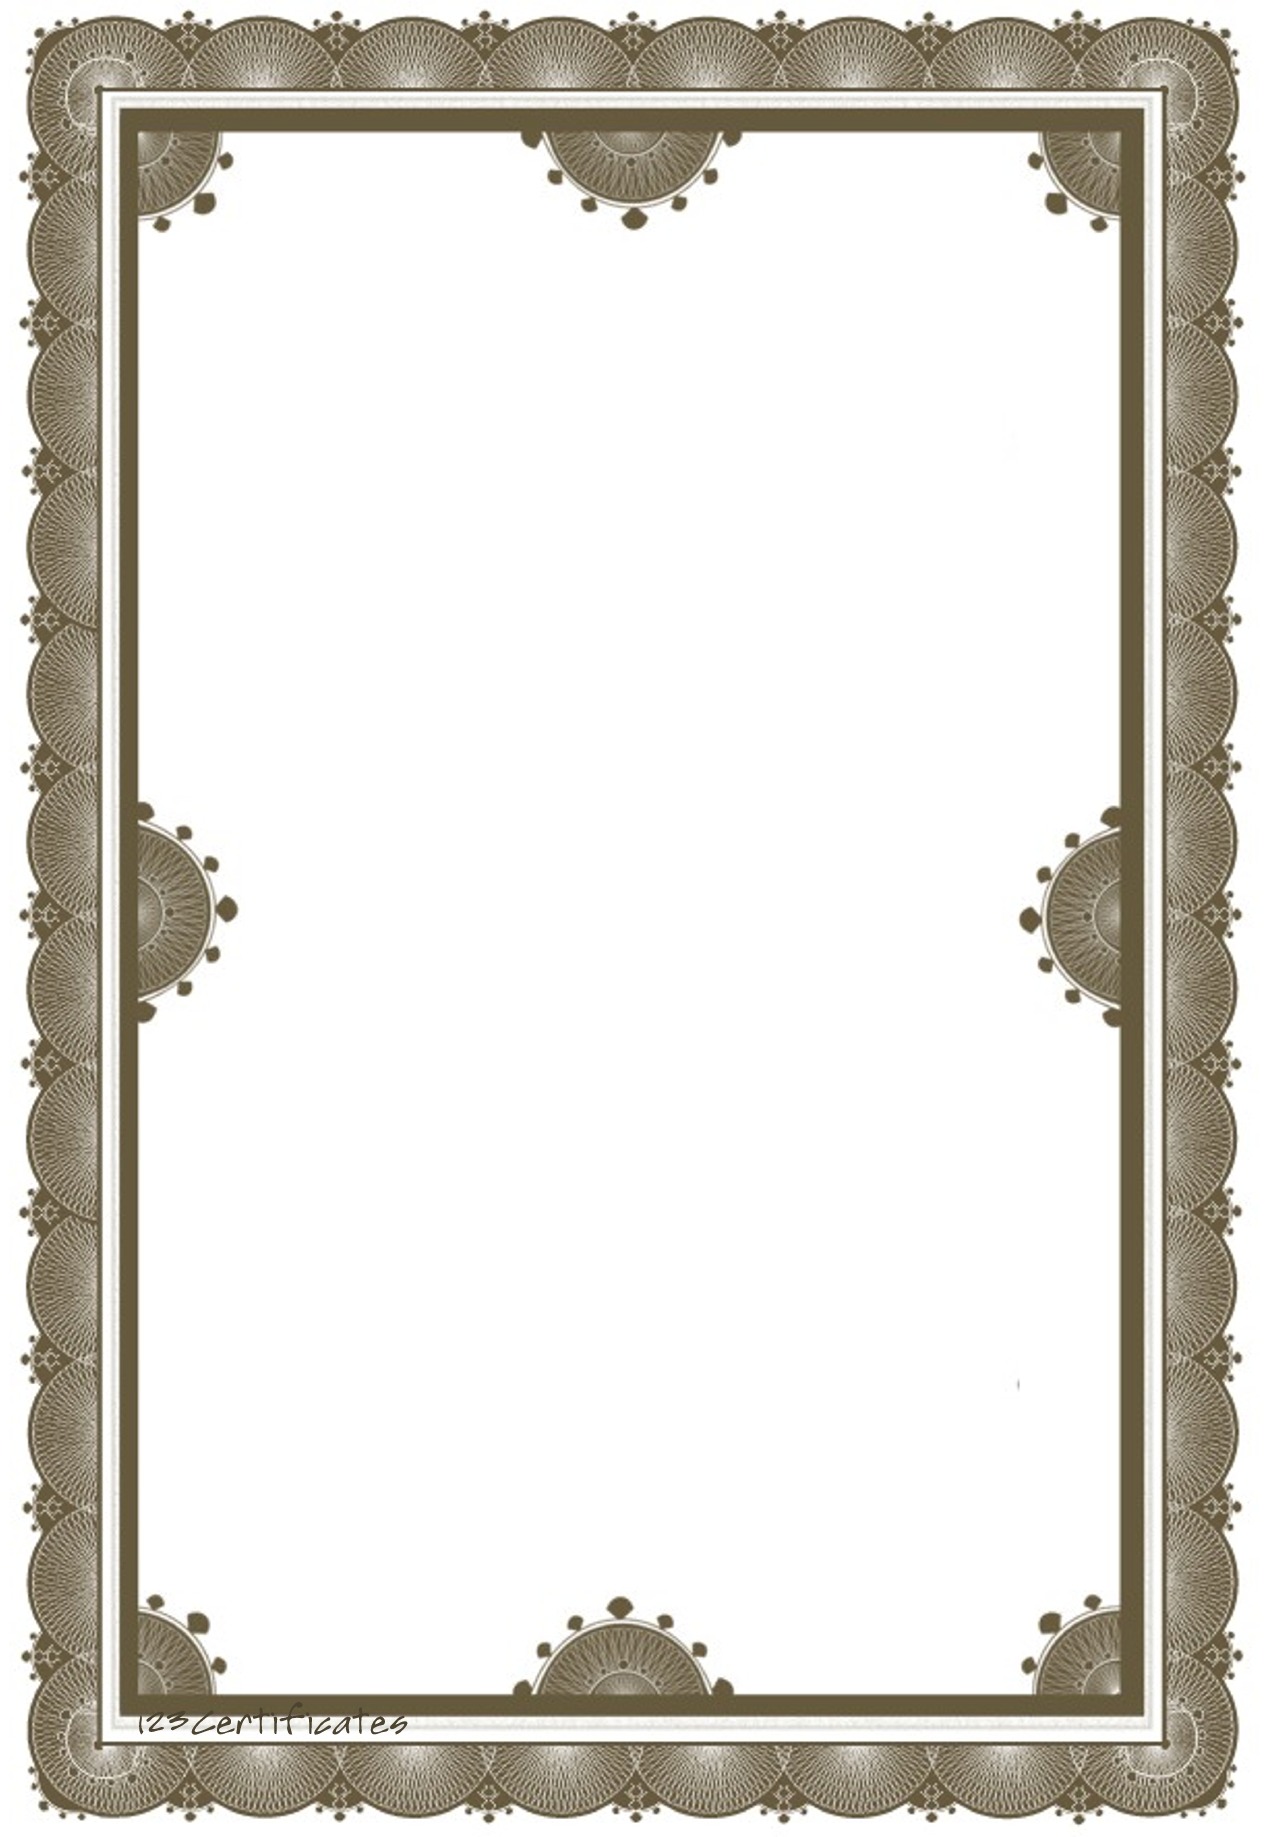 Free certificate borders to download Intended For Free Printable Certificate Border Templates